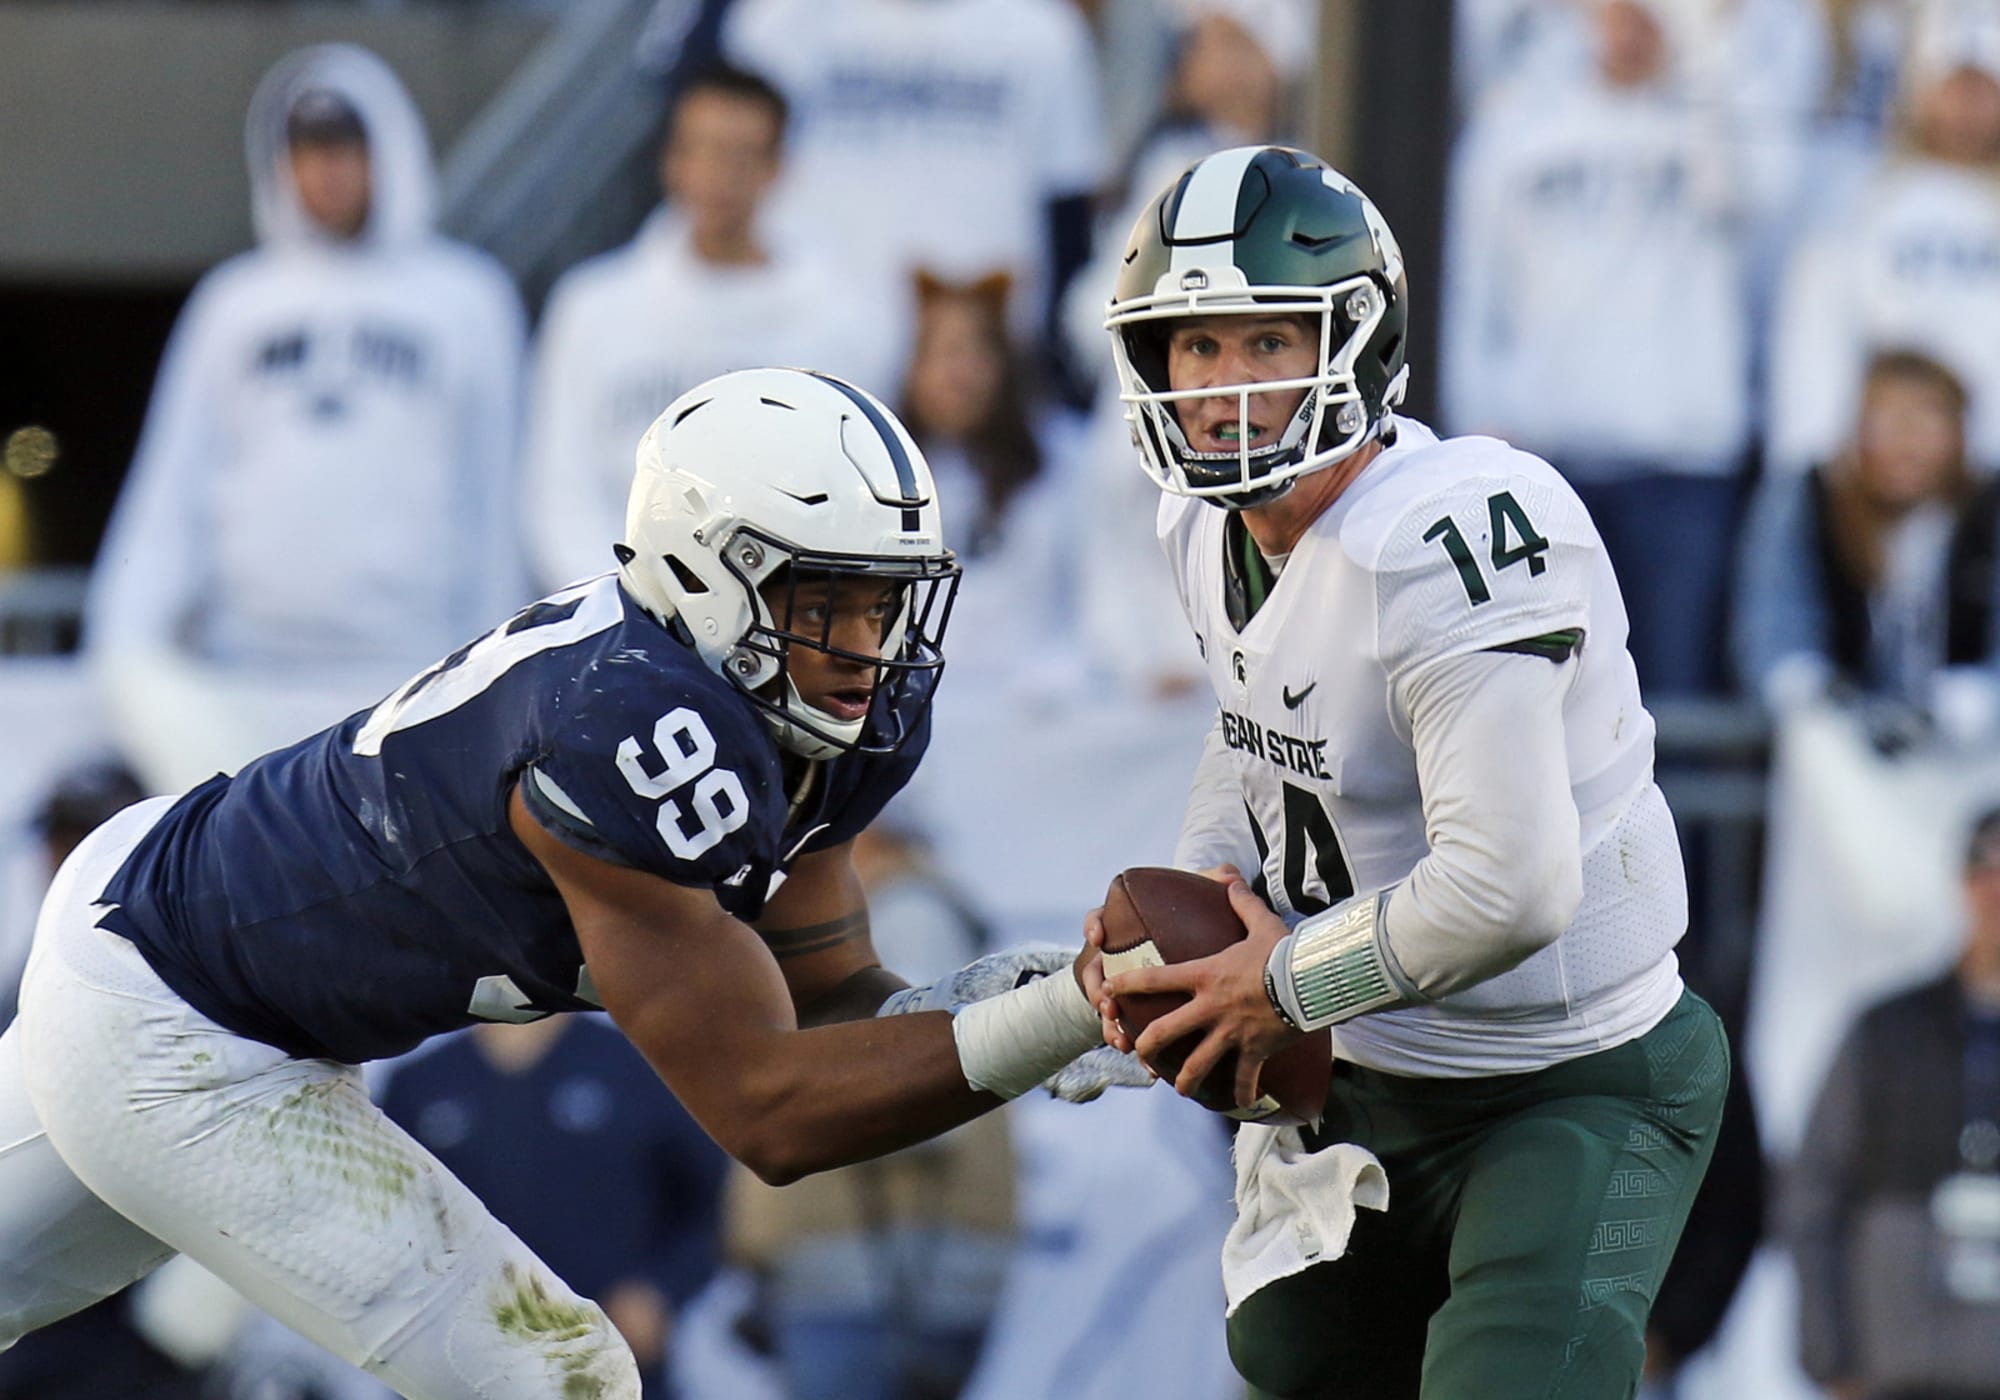 Penn State vs. Michigan State Start Time, Live Stream, TV Info and More